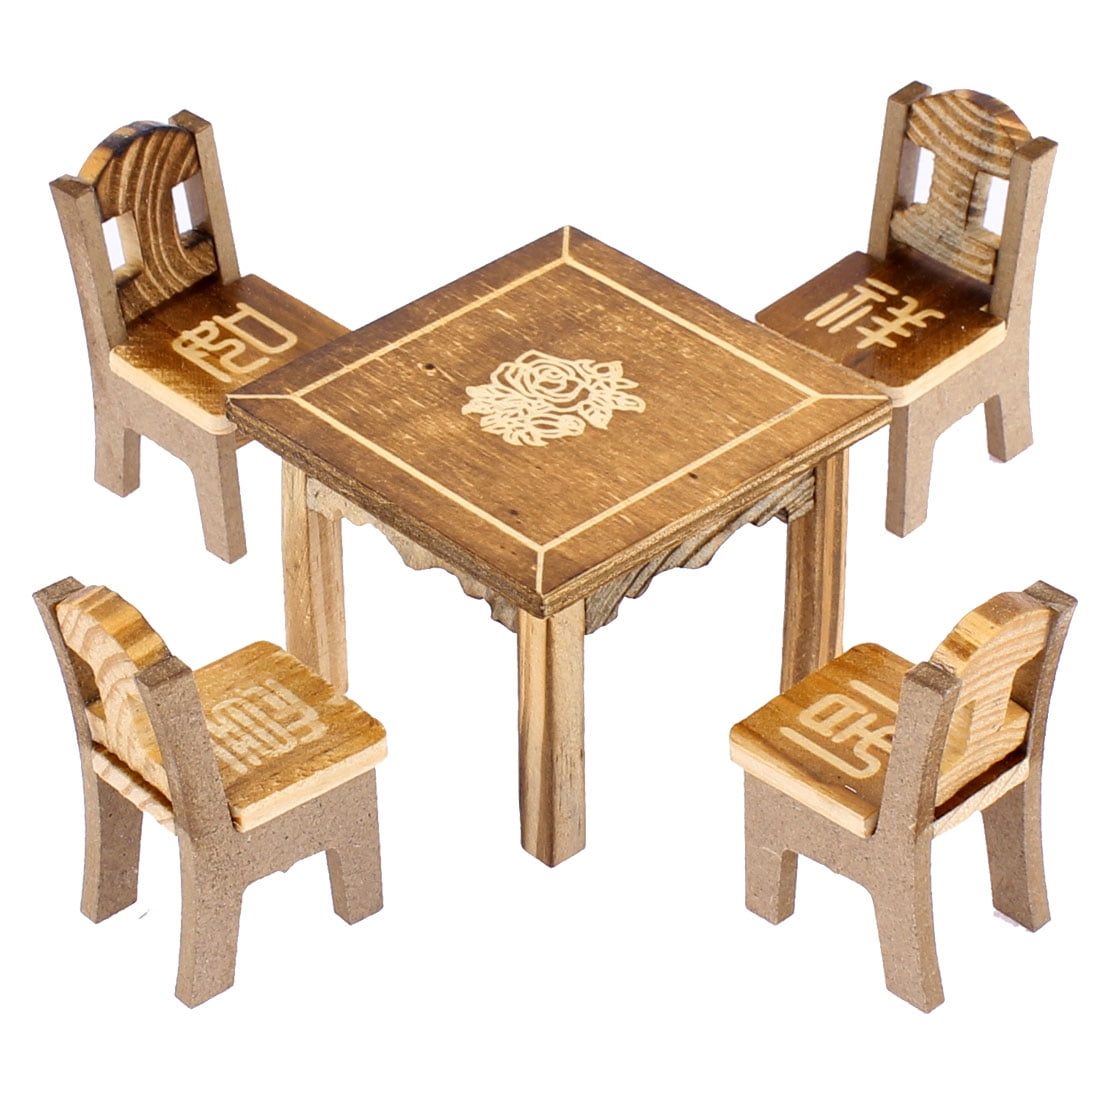 GLORIA FURNITURE SIZE DOLLHOUSE Meal Time 4 Chairs Round Dining Table Play Set 